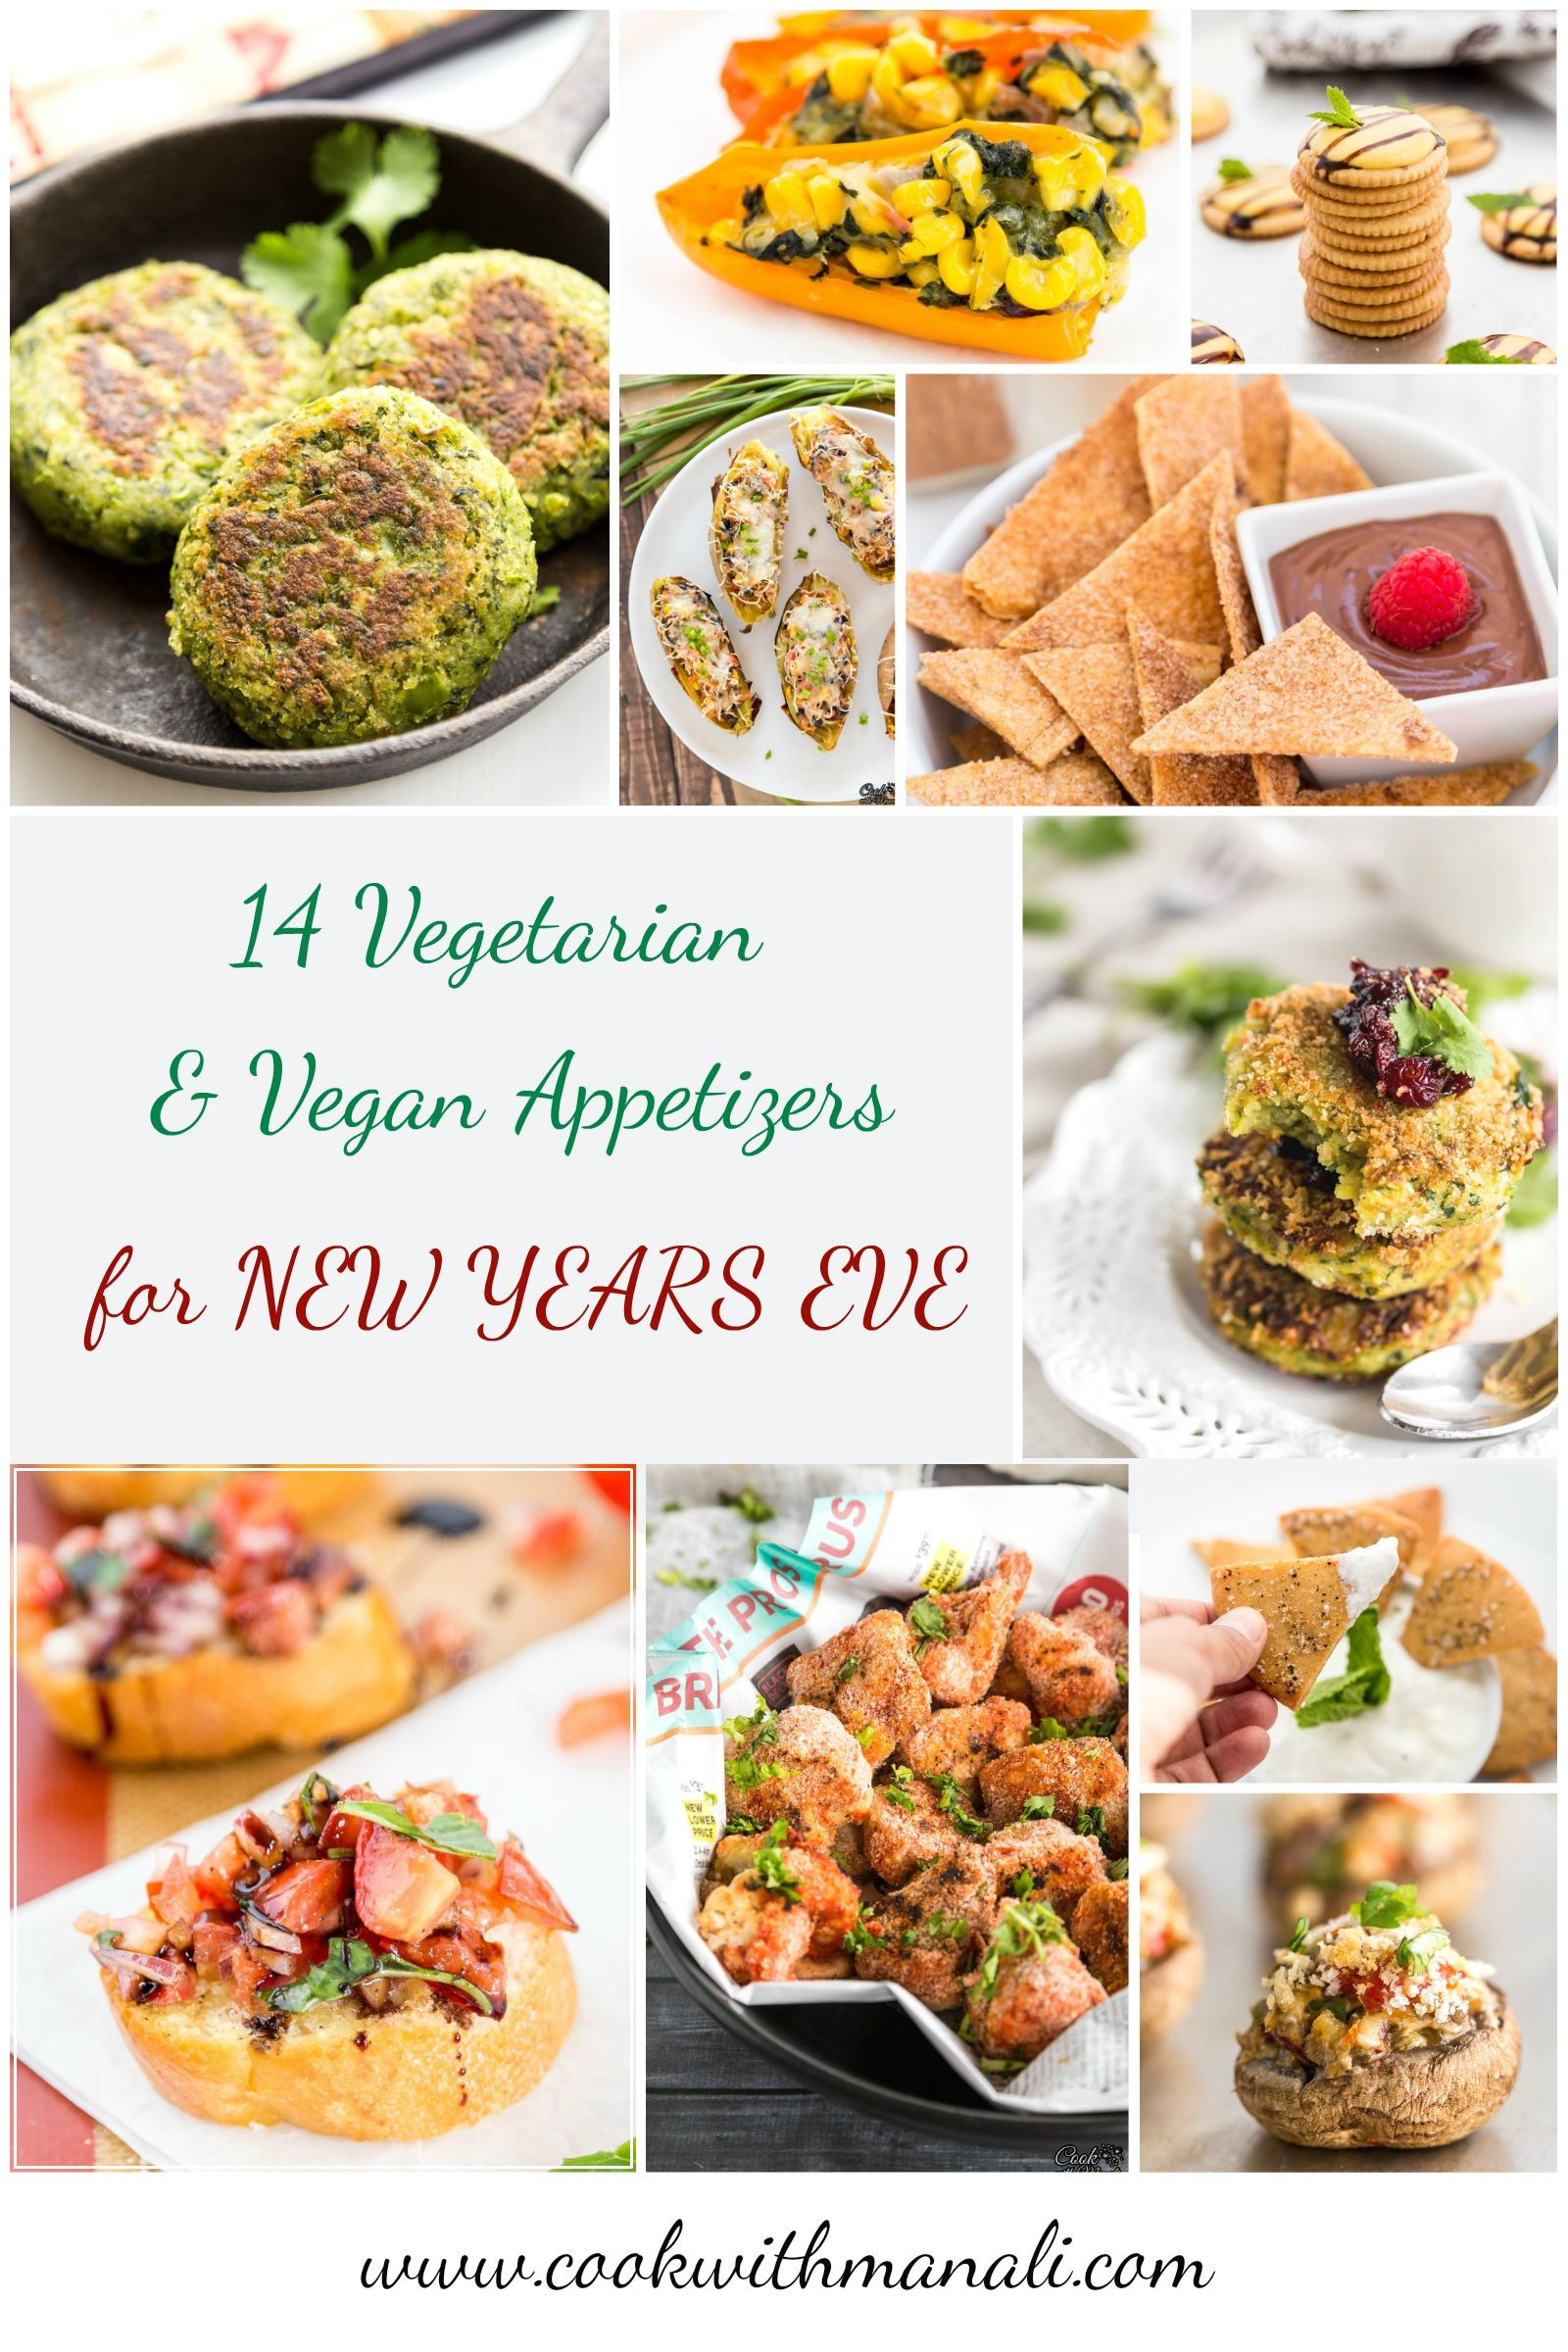 Vegetarian New Year Eve Recipes
 14 Ve arian Vegan Appetizers for New Years Eve